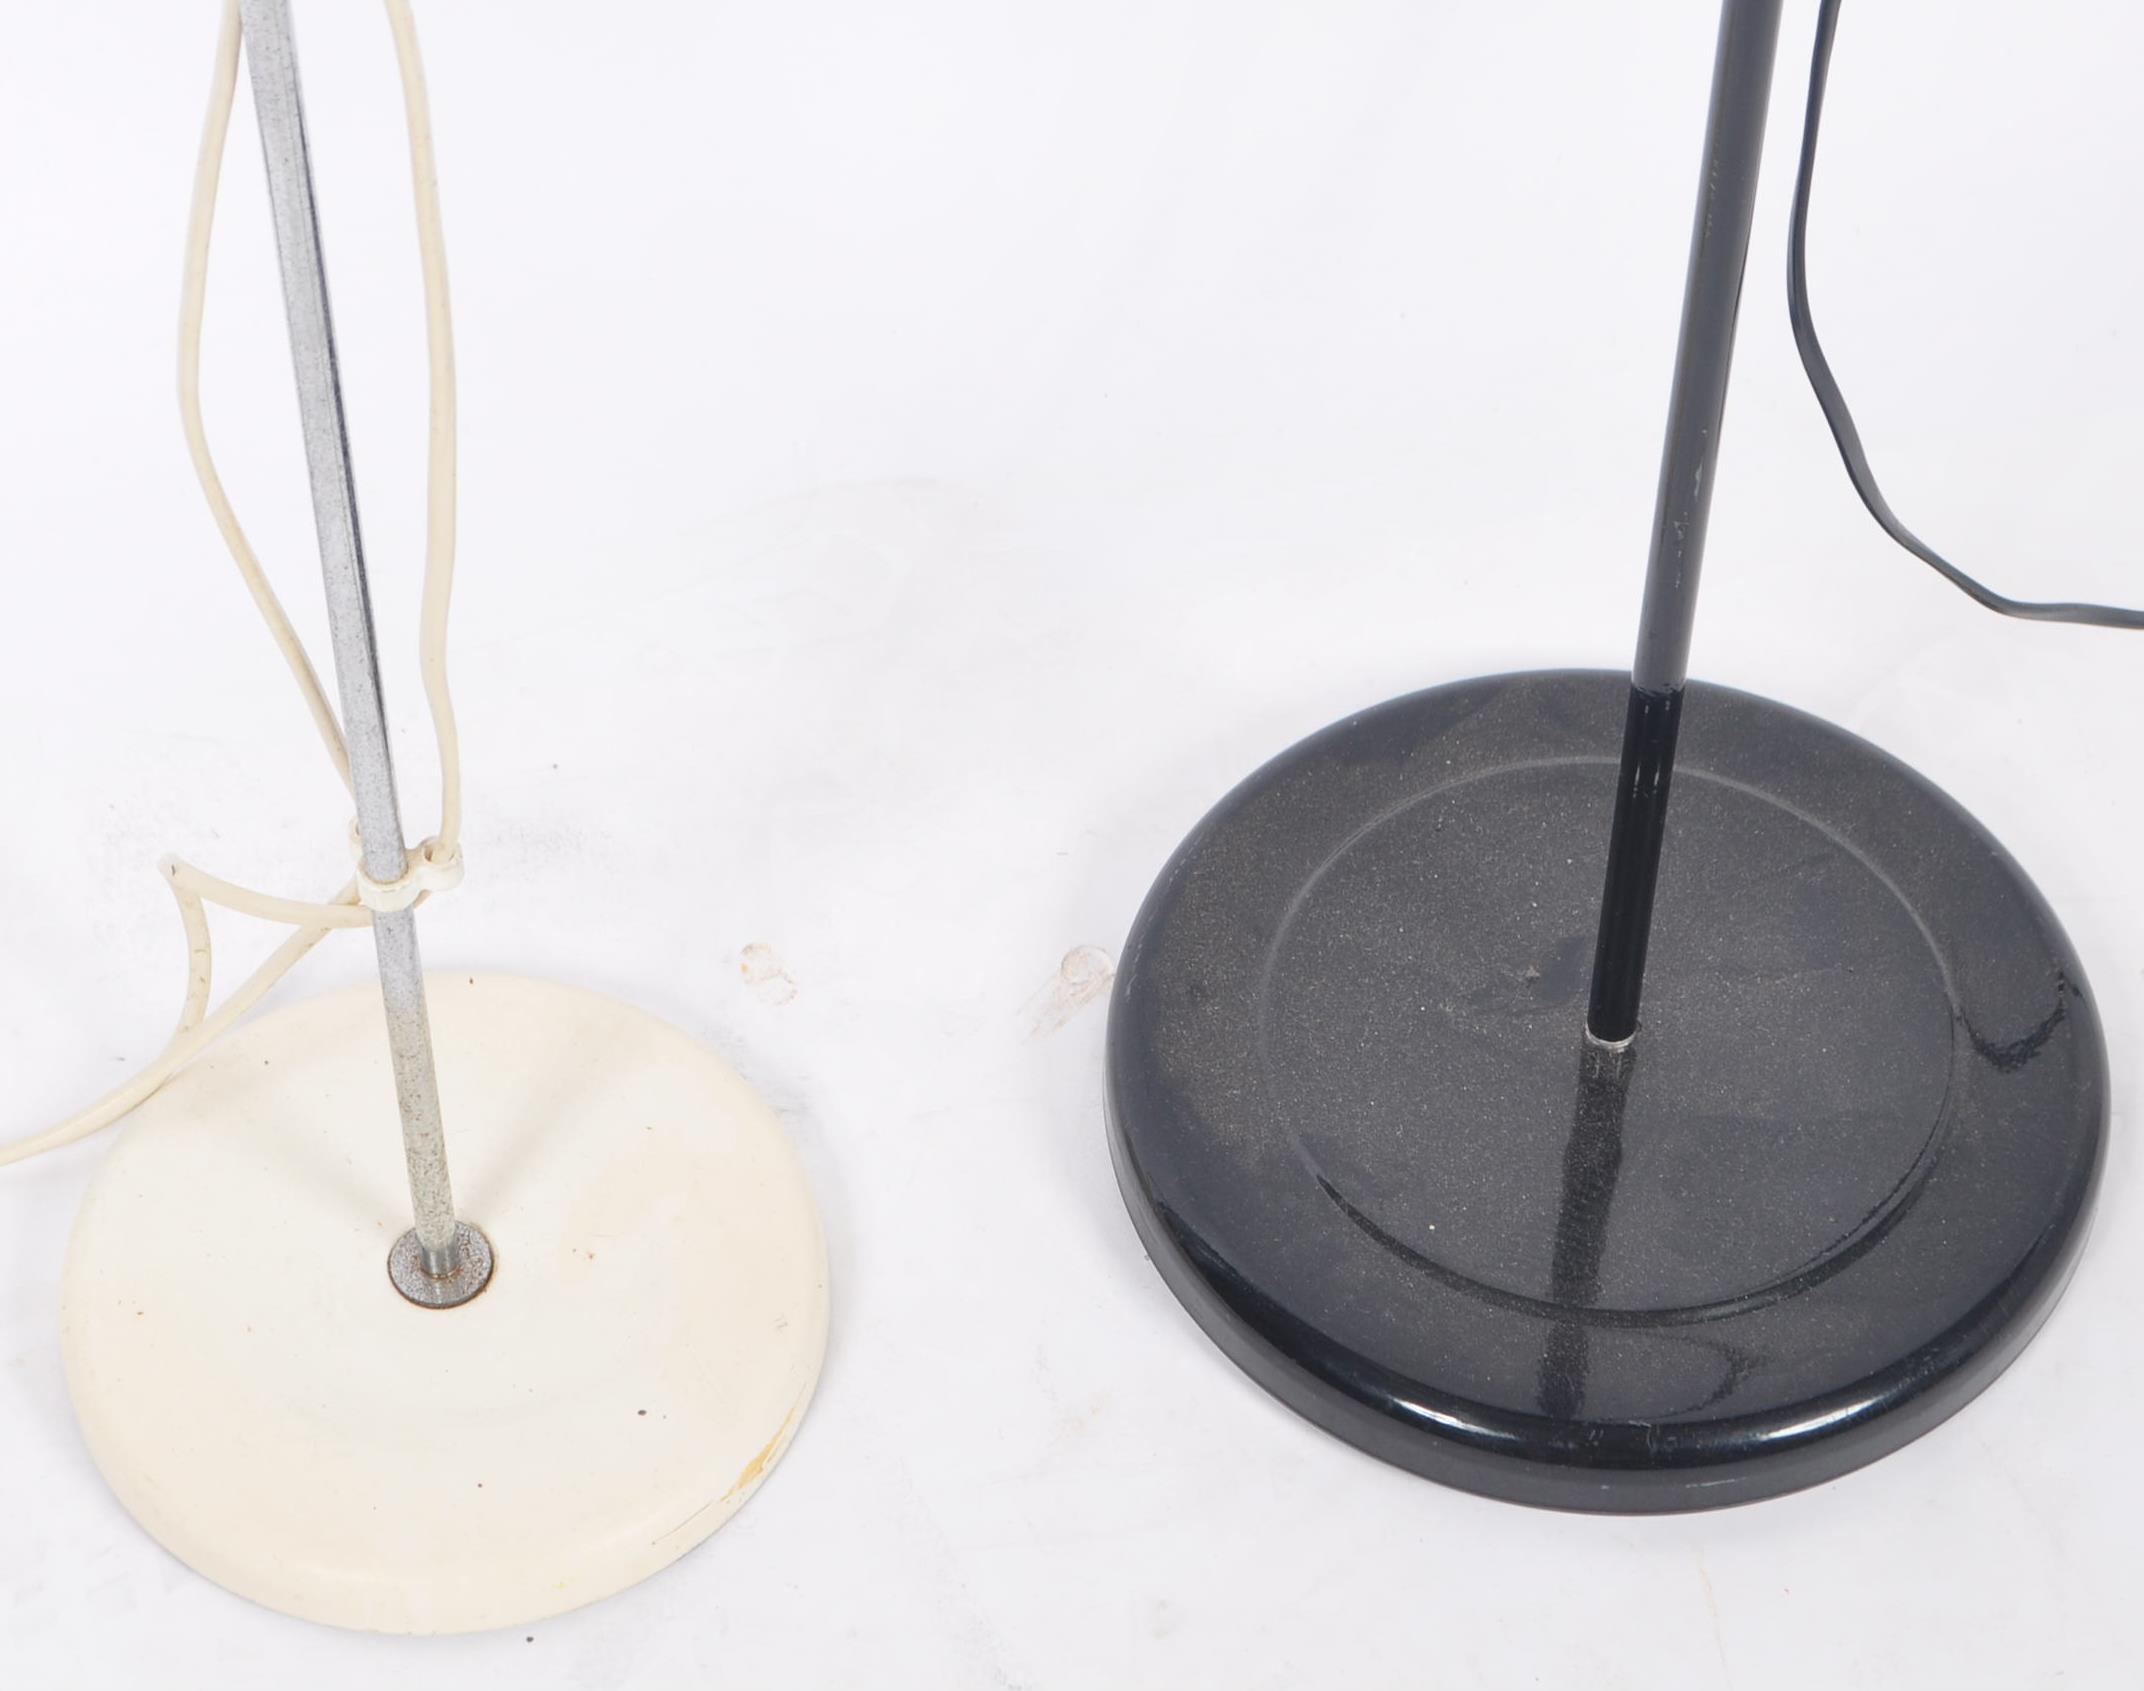 TWO RETRO VINTAGE SPOT LIGHT FLOOR STANDING LAMPS - Image 4 of 4